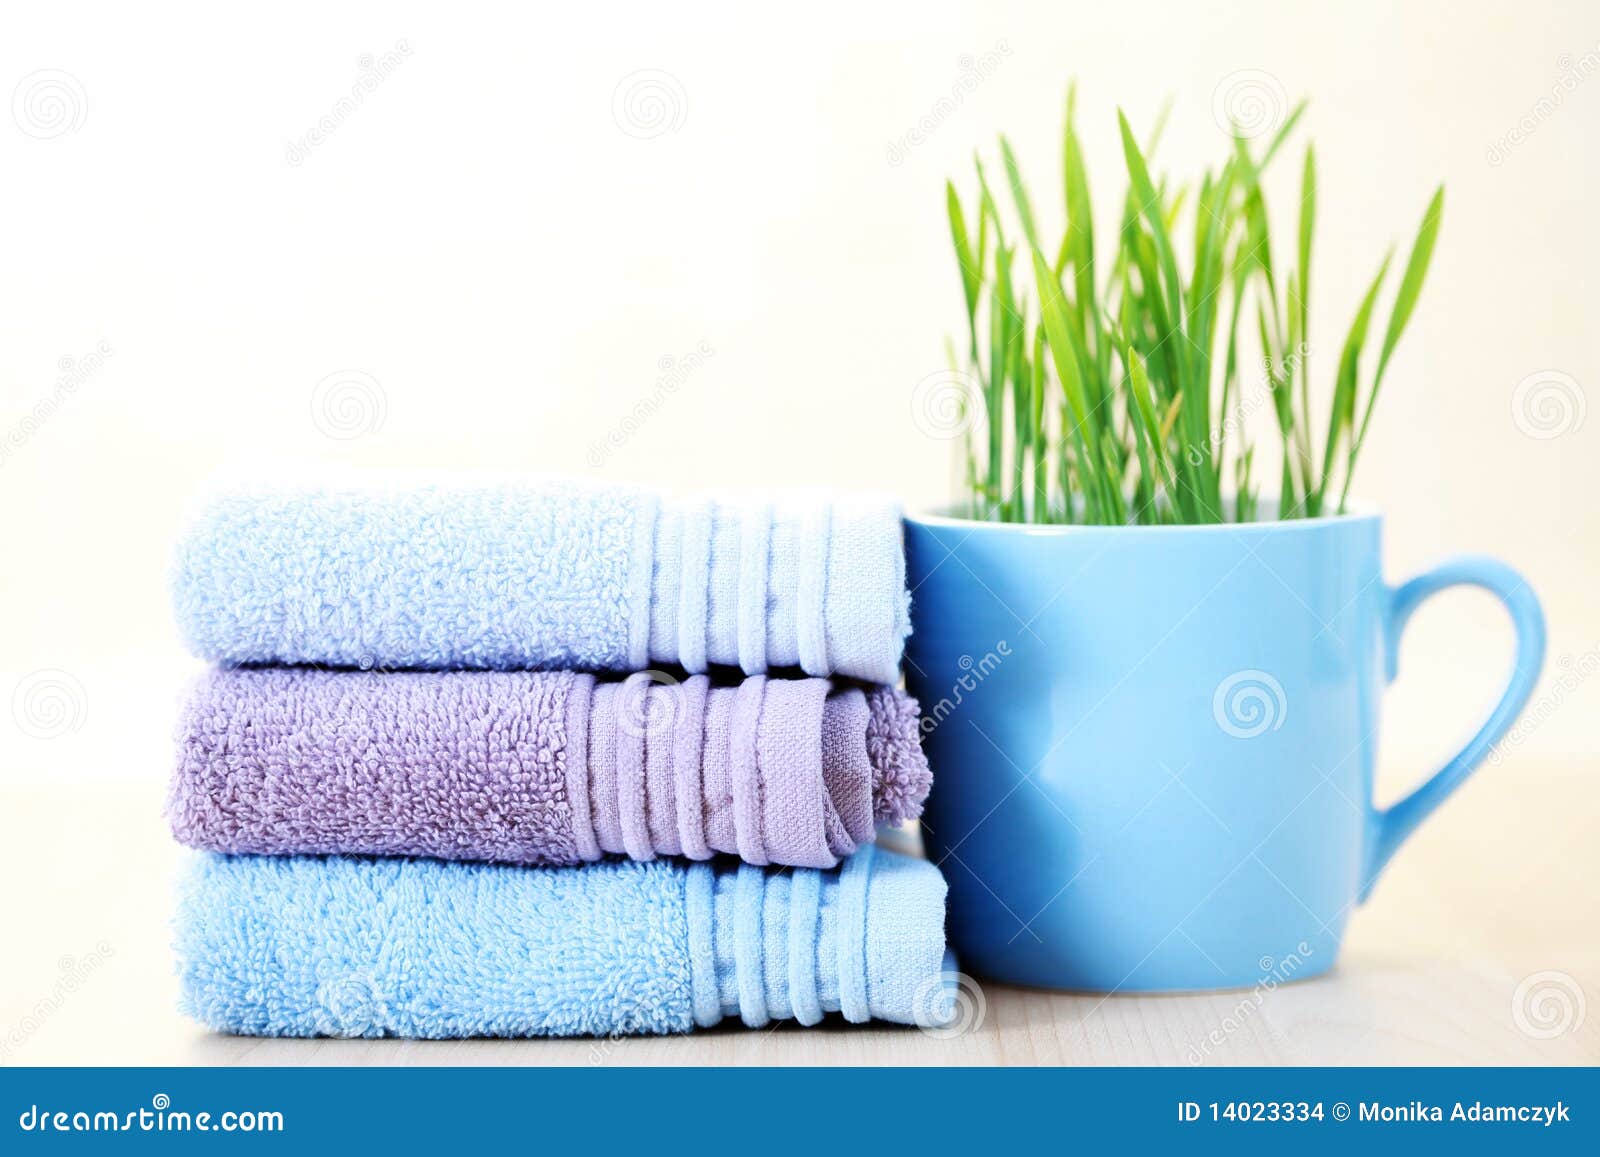 Stack of towels. Soft and fresh towels with cup of grass - beauty treatment